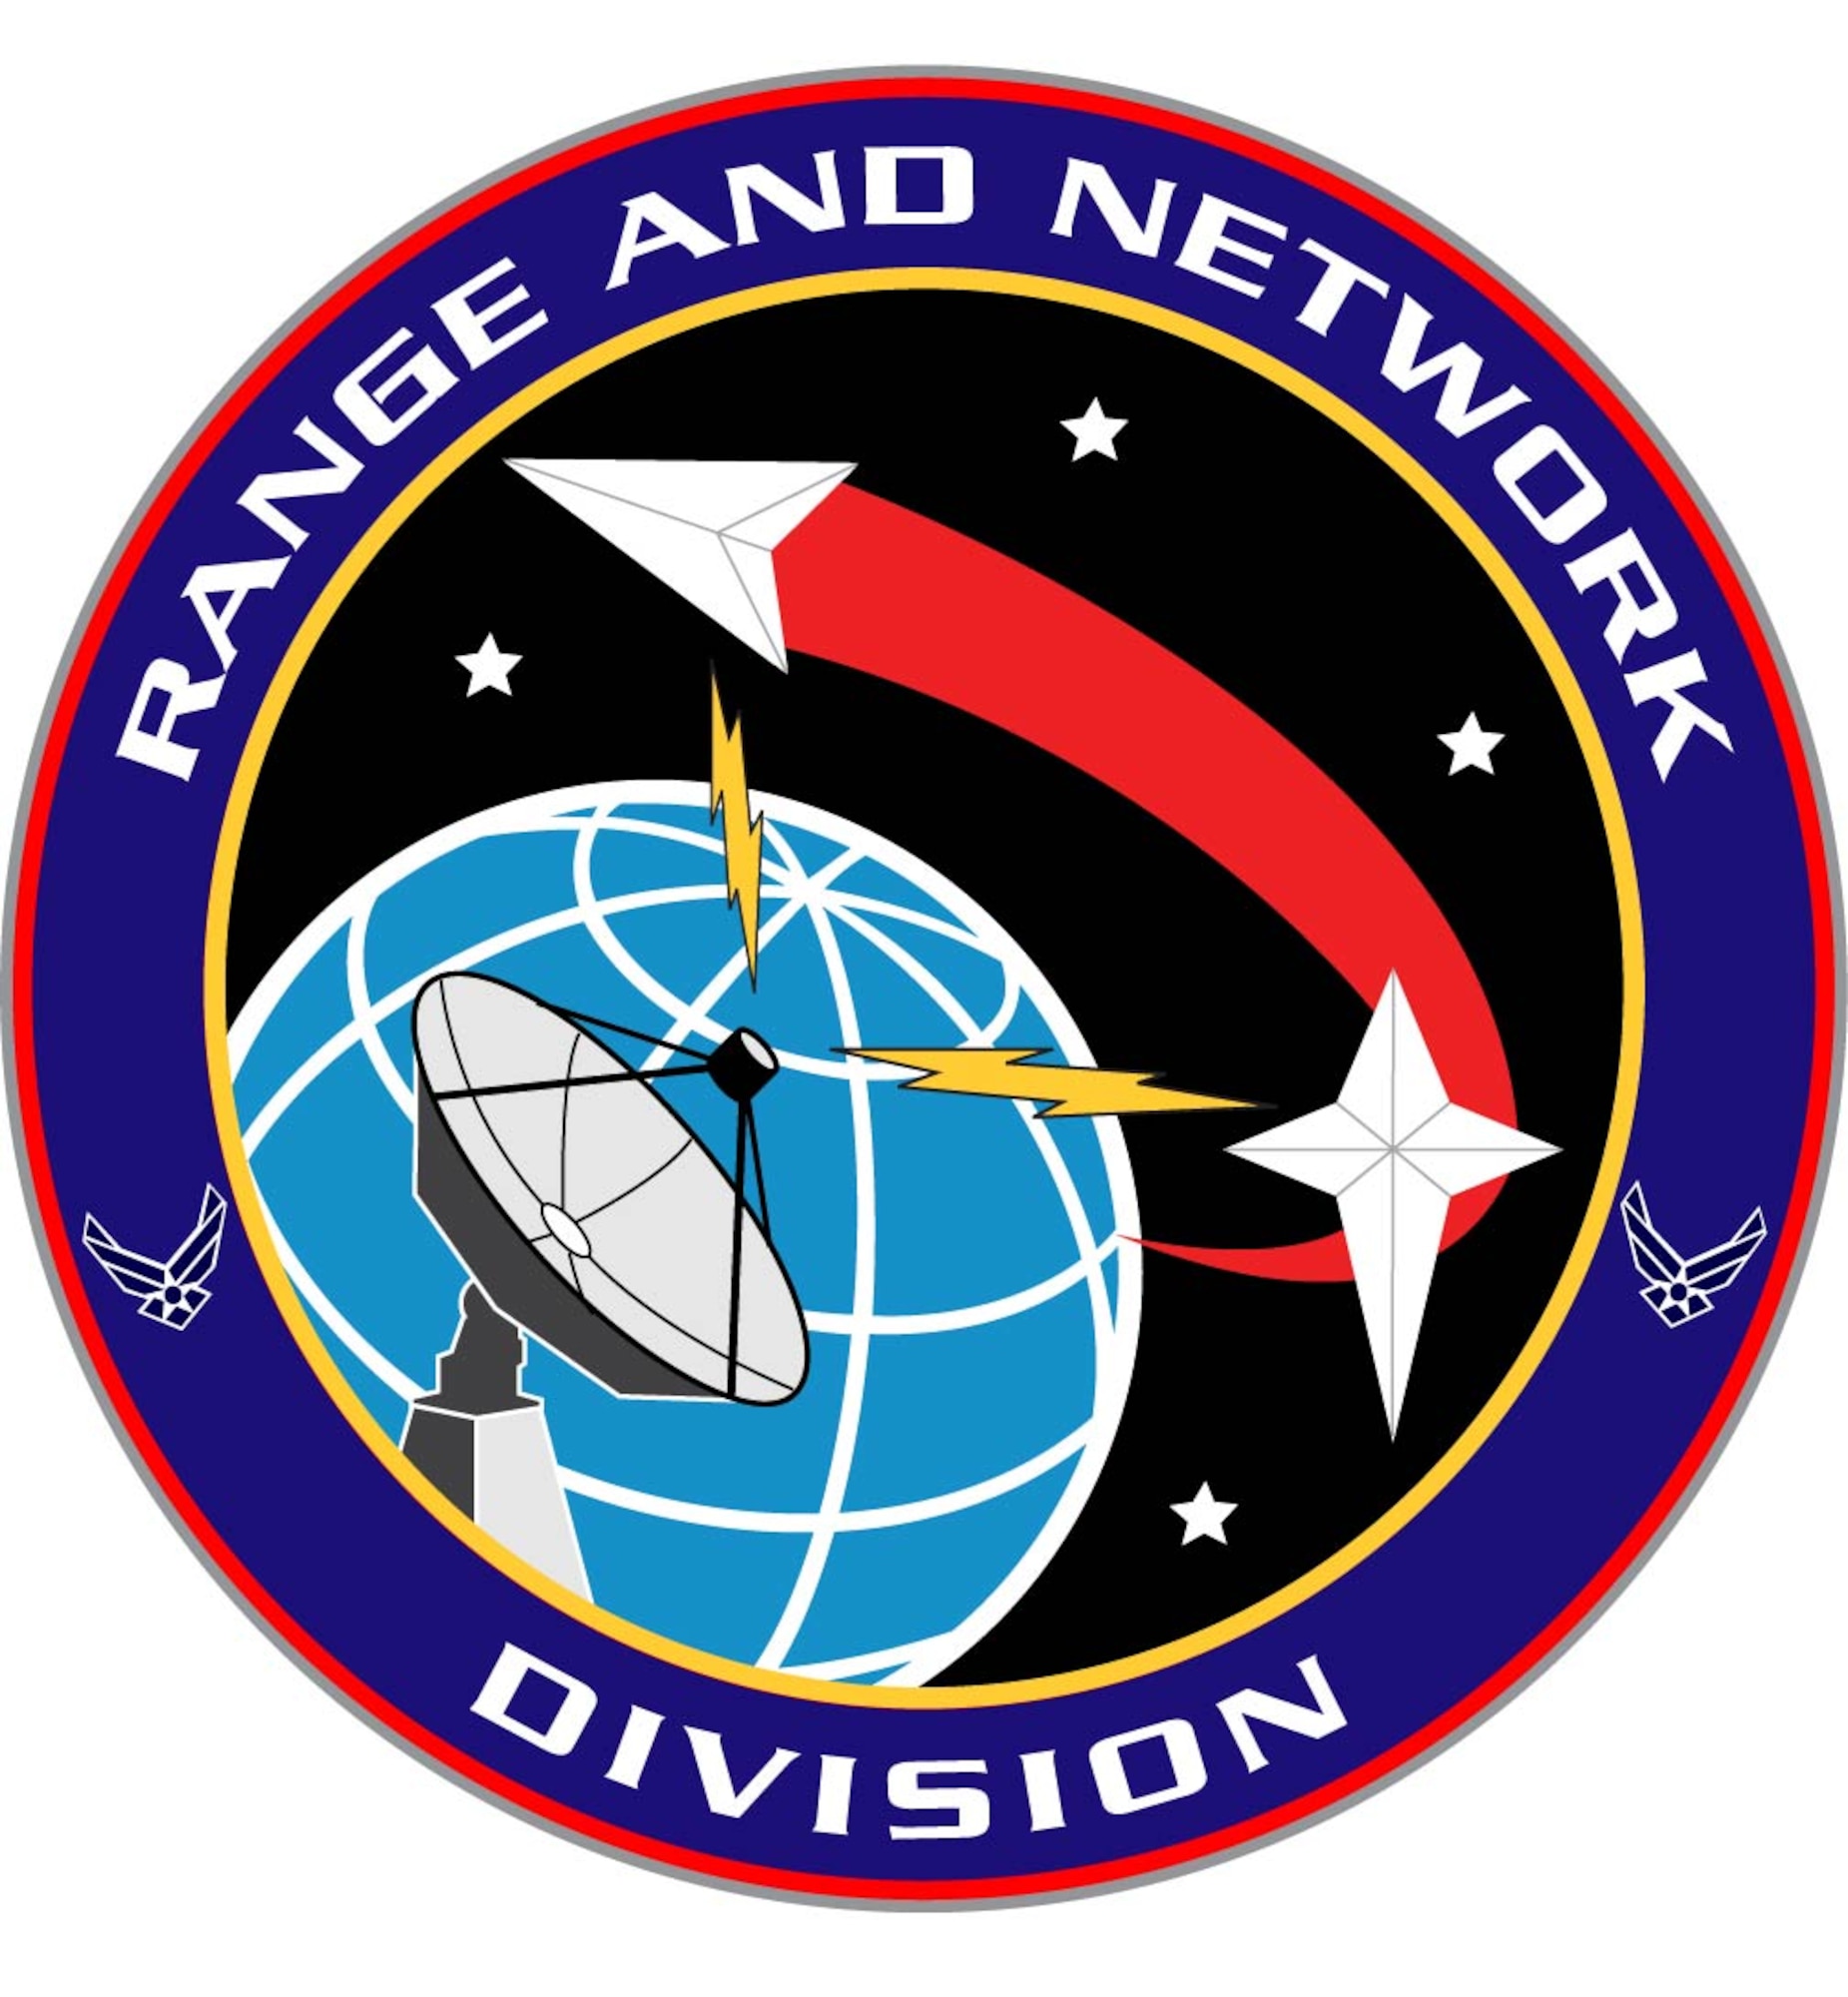 Range and Network Division